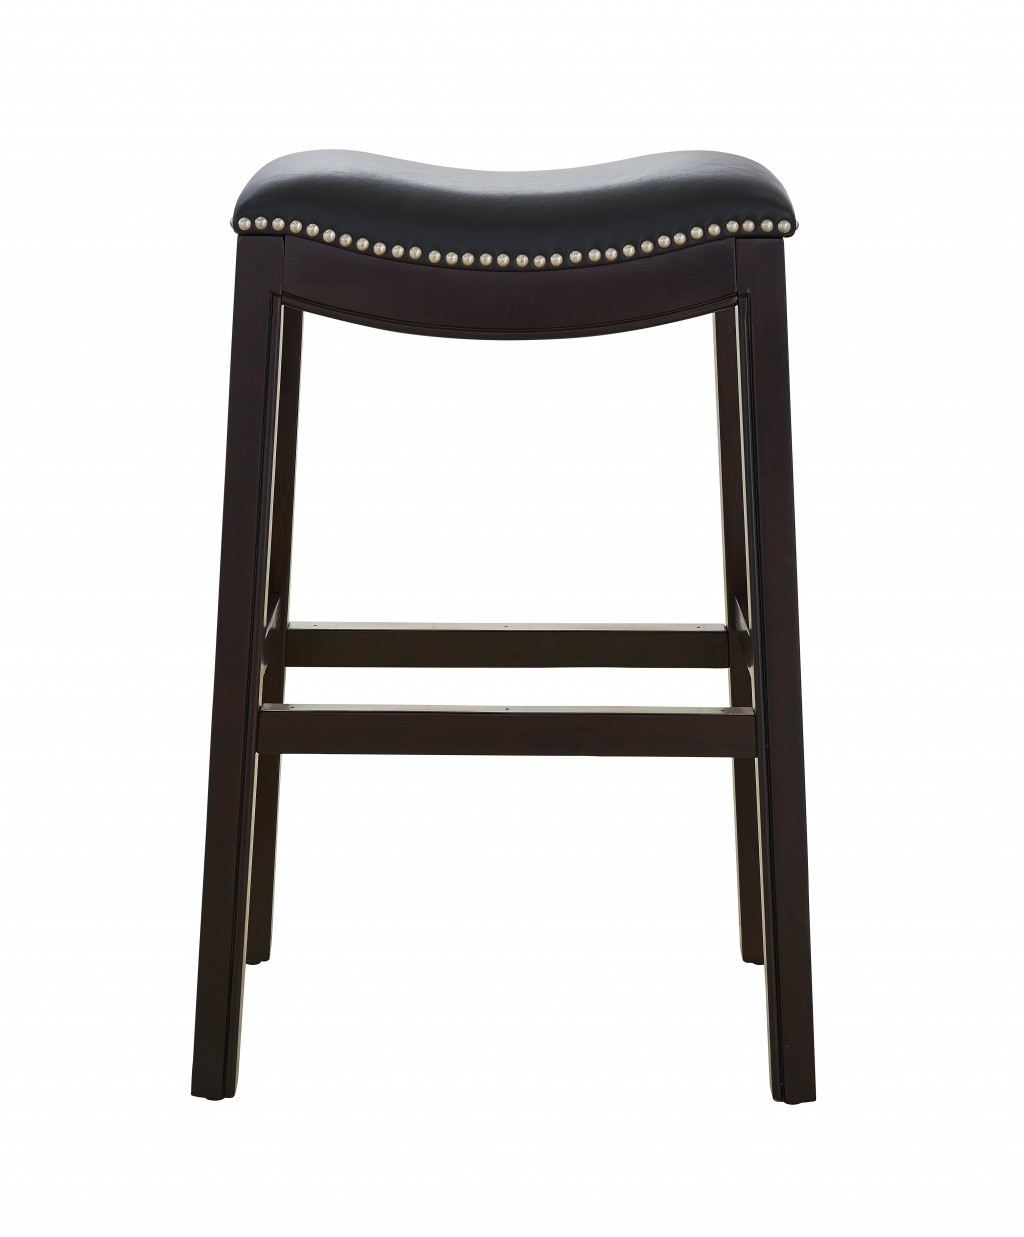 30" Espresso and Black Saddle Style Counter Height Bar Stool